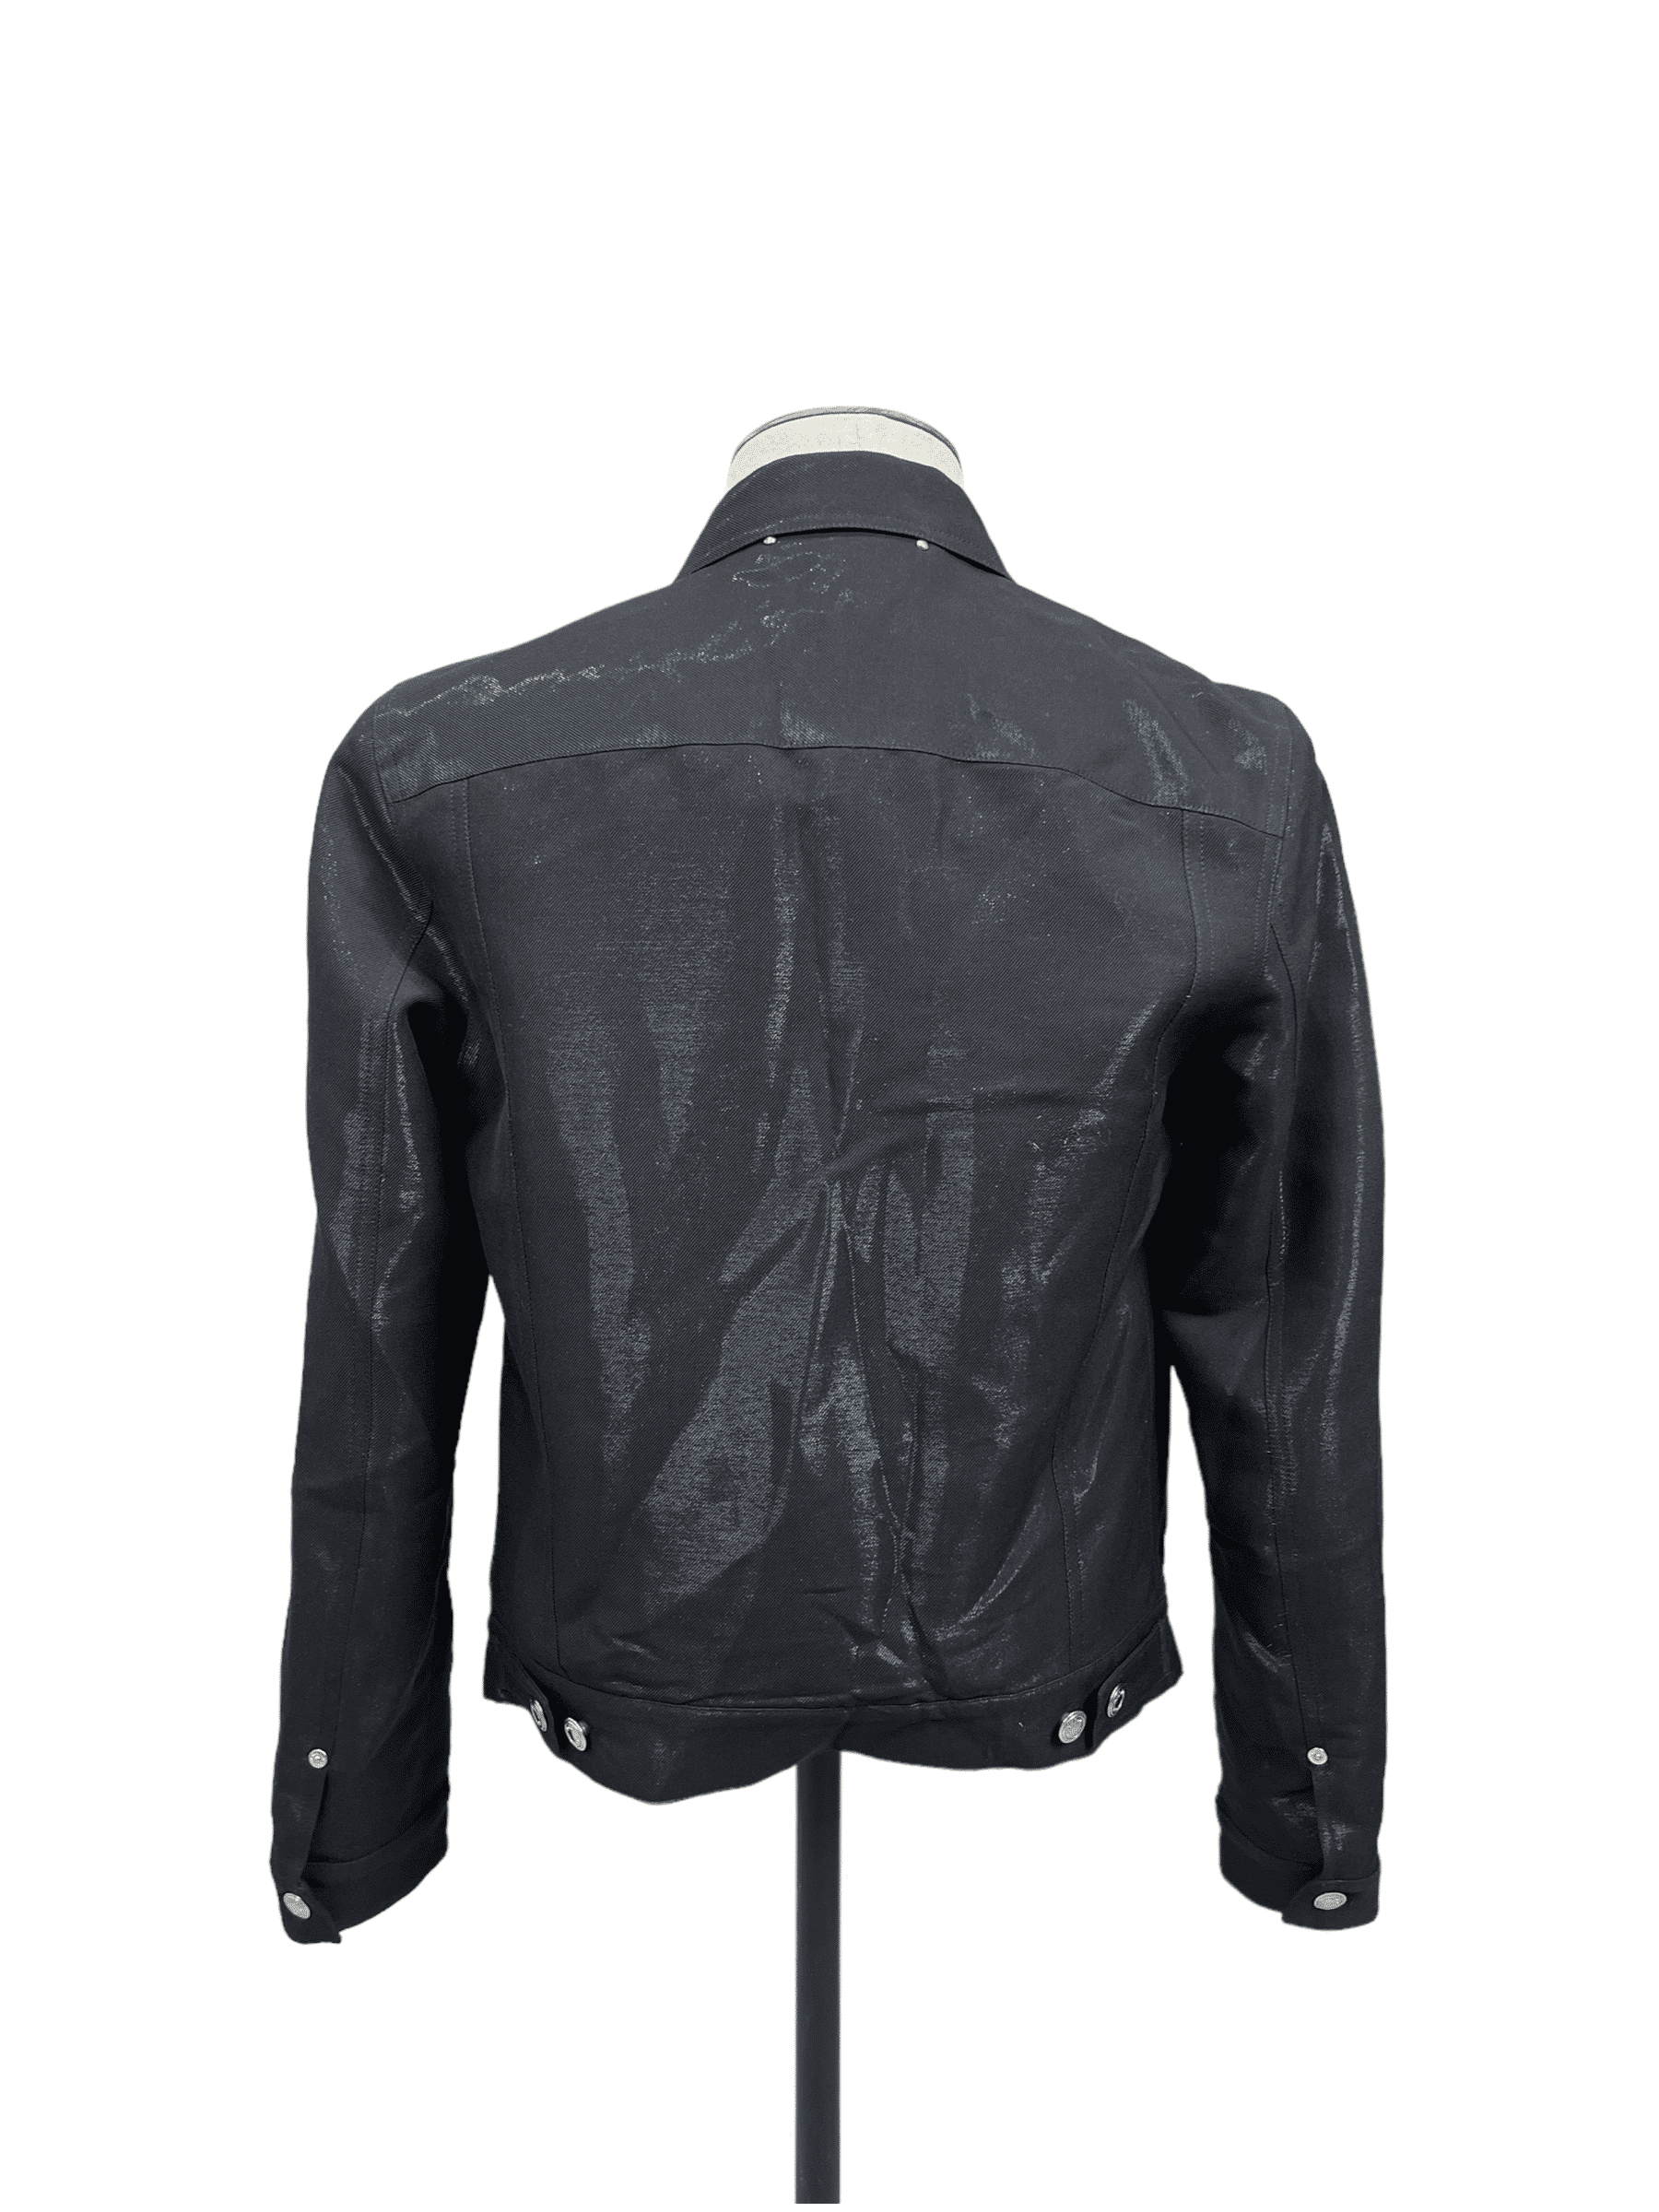 Paul Smith Black Trucker Jacket with Patterned Inner Lining  - Genuine Design Luxury Consignment for Men. New & Pre-Owned Clothing, Shoes, & Accessories. Calgary, Canada